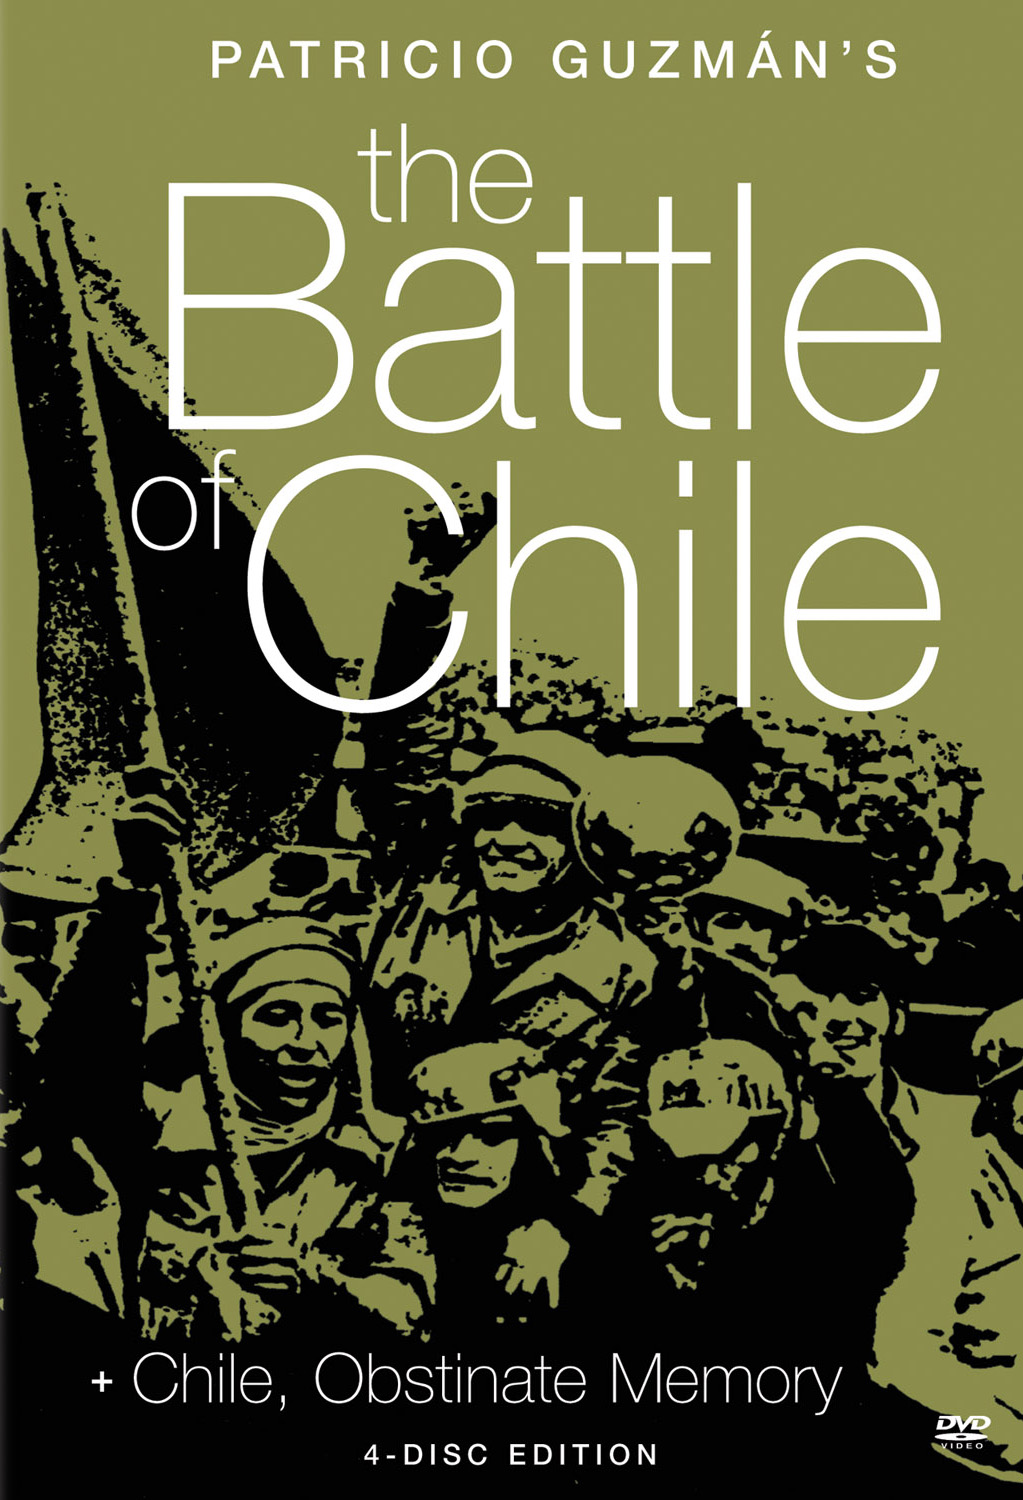 The Battle of Chile DVD sleeve image